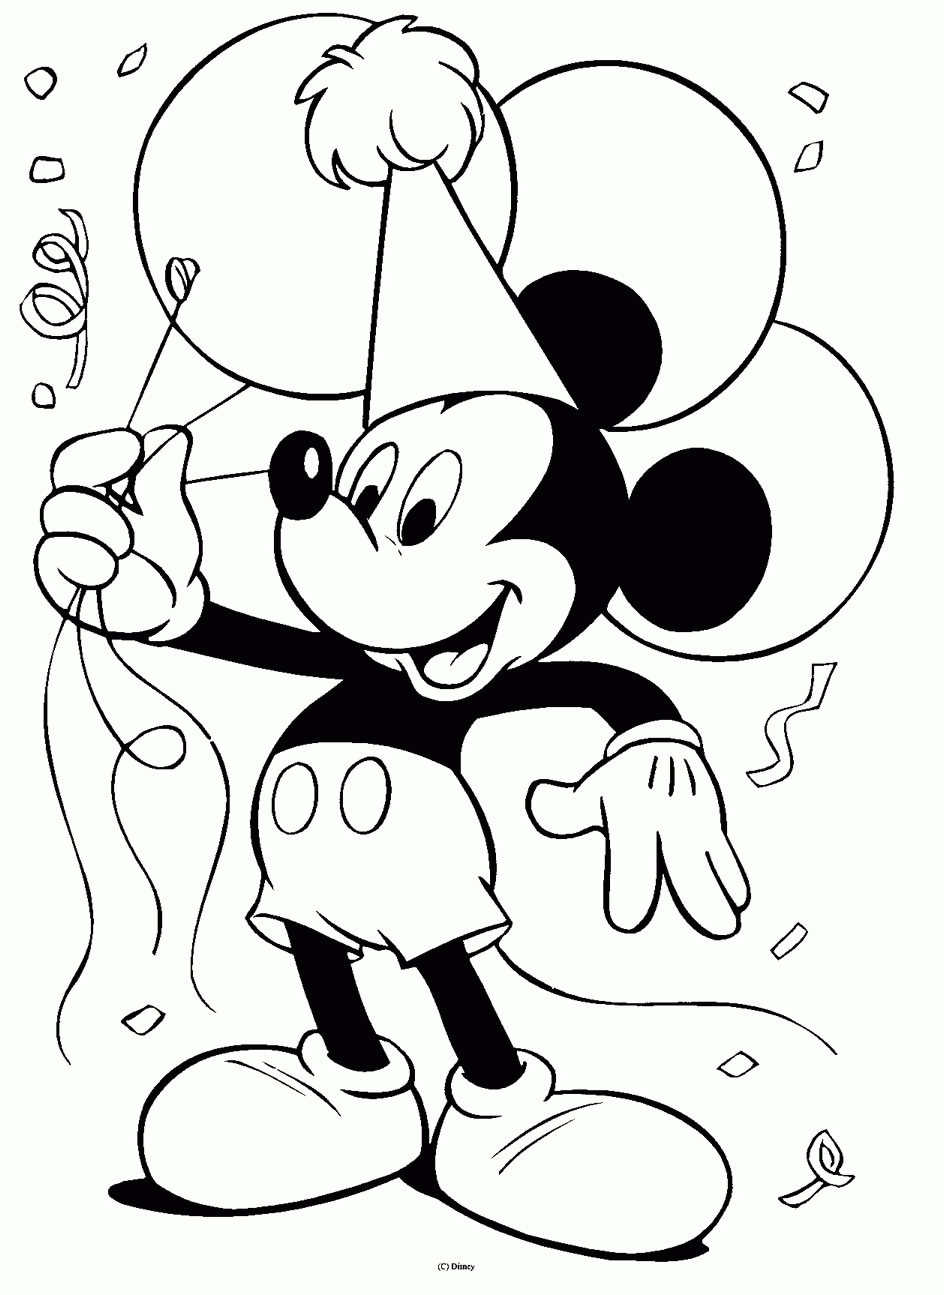 disney coloring pages online disney coloring pages to download and print for free pages online coloring disney 